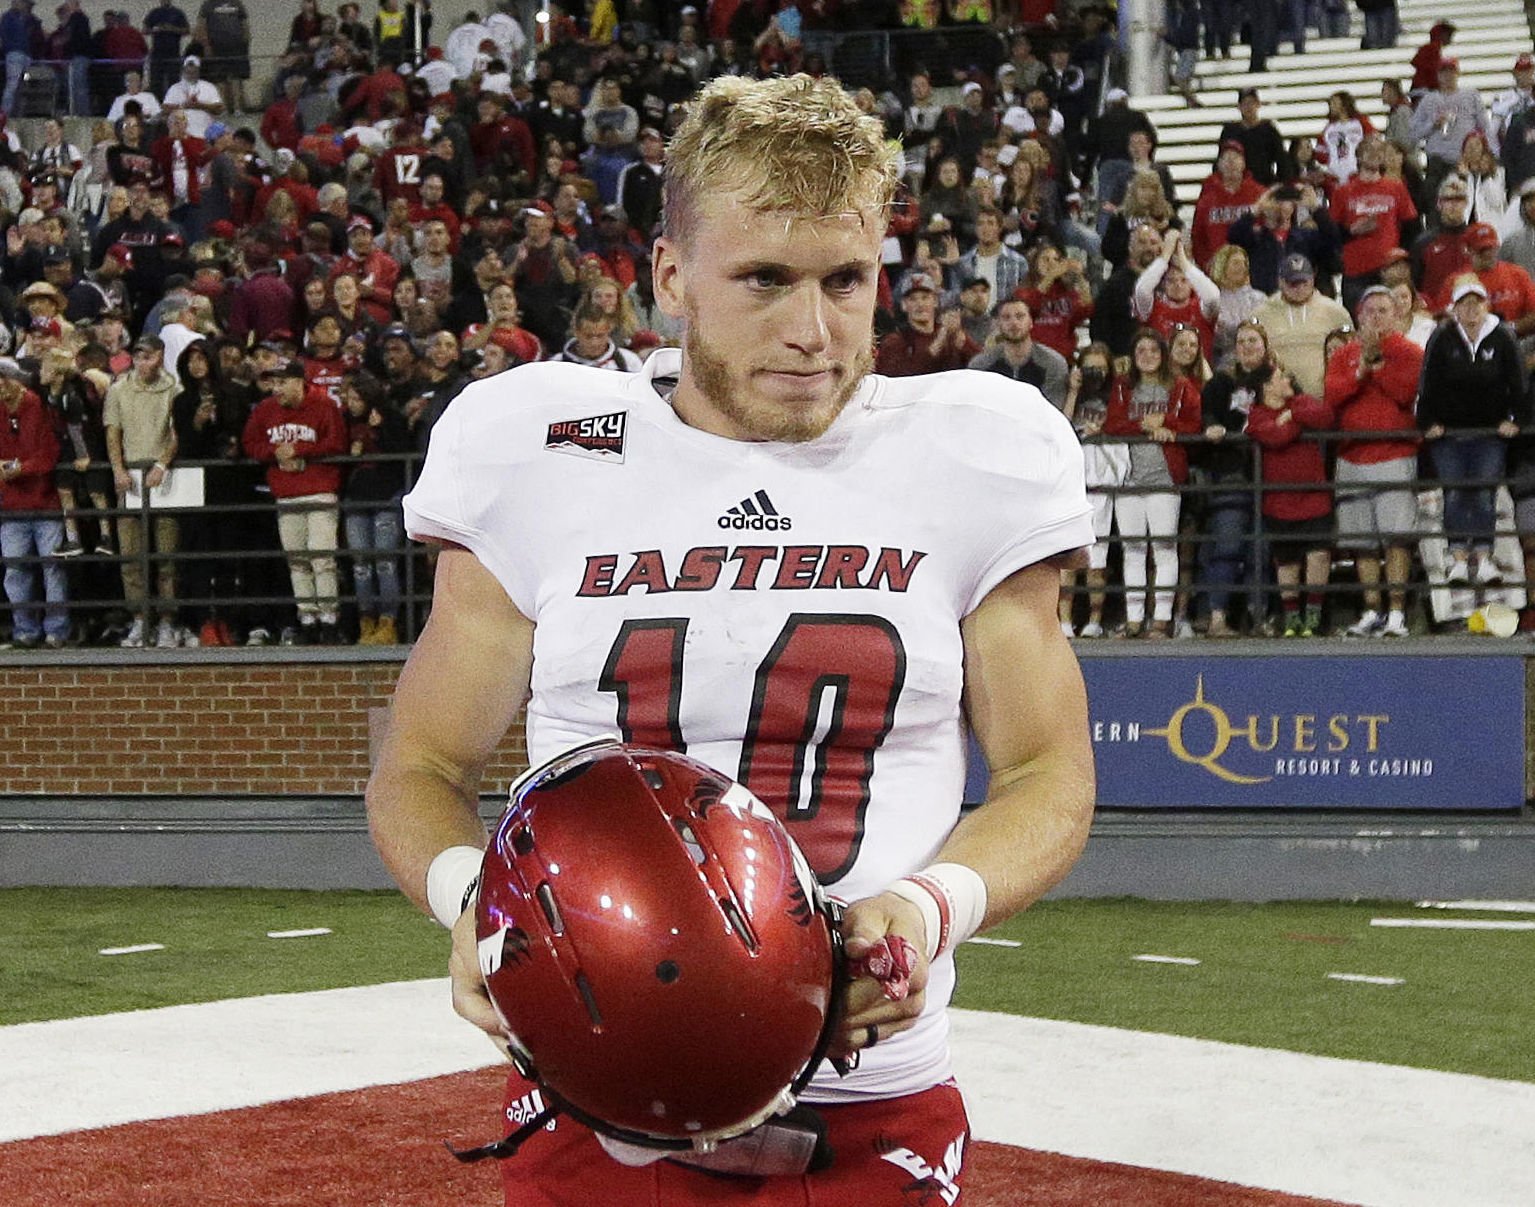 Cooper Kupp switching jersey number to 